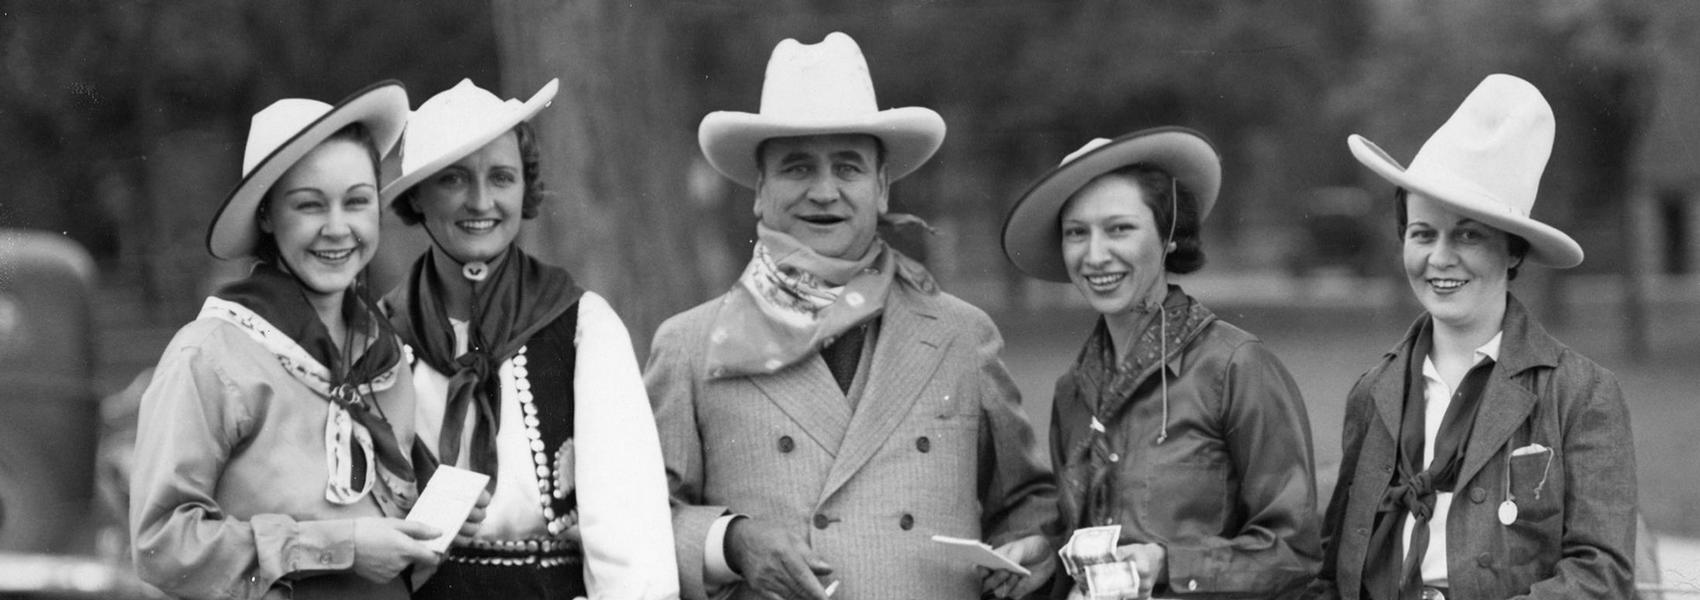 Clyde wearing Cowboy hat in center two women in Cowboy hats to his left and right